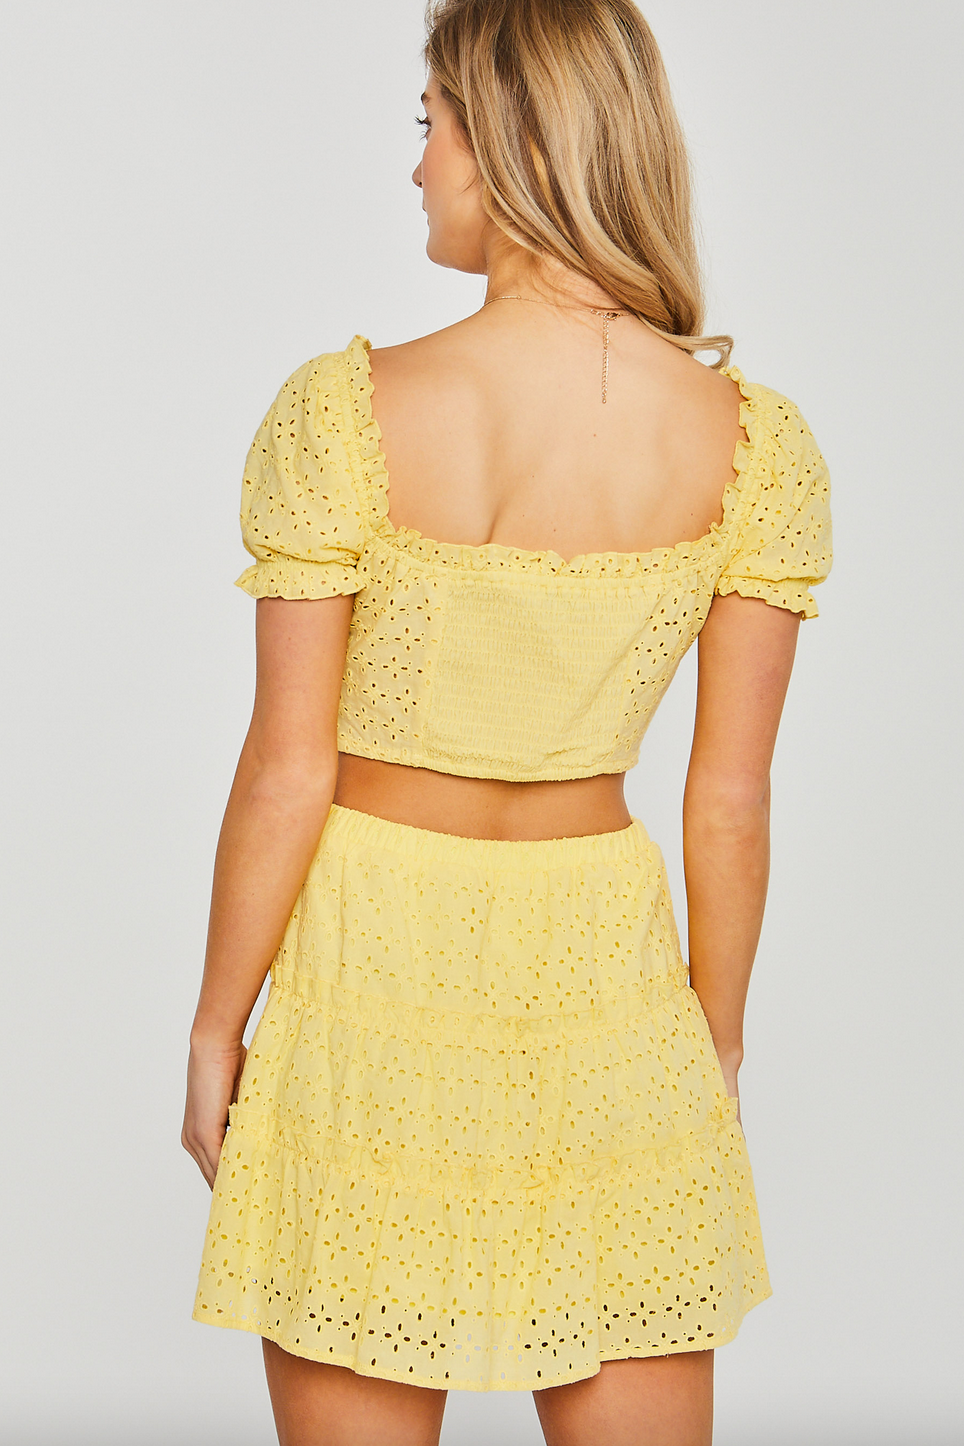 LACE EYELET TOP